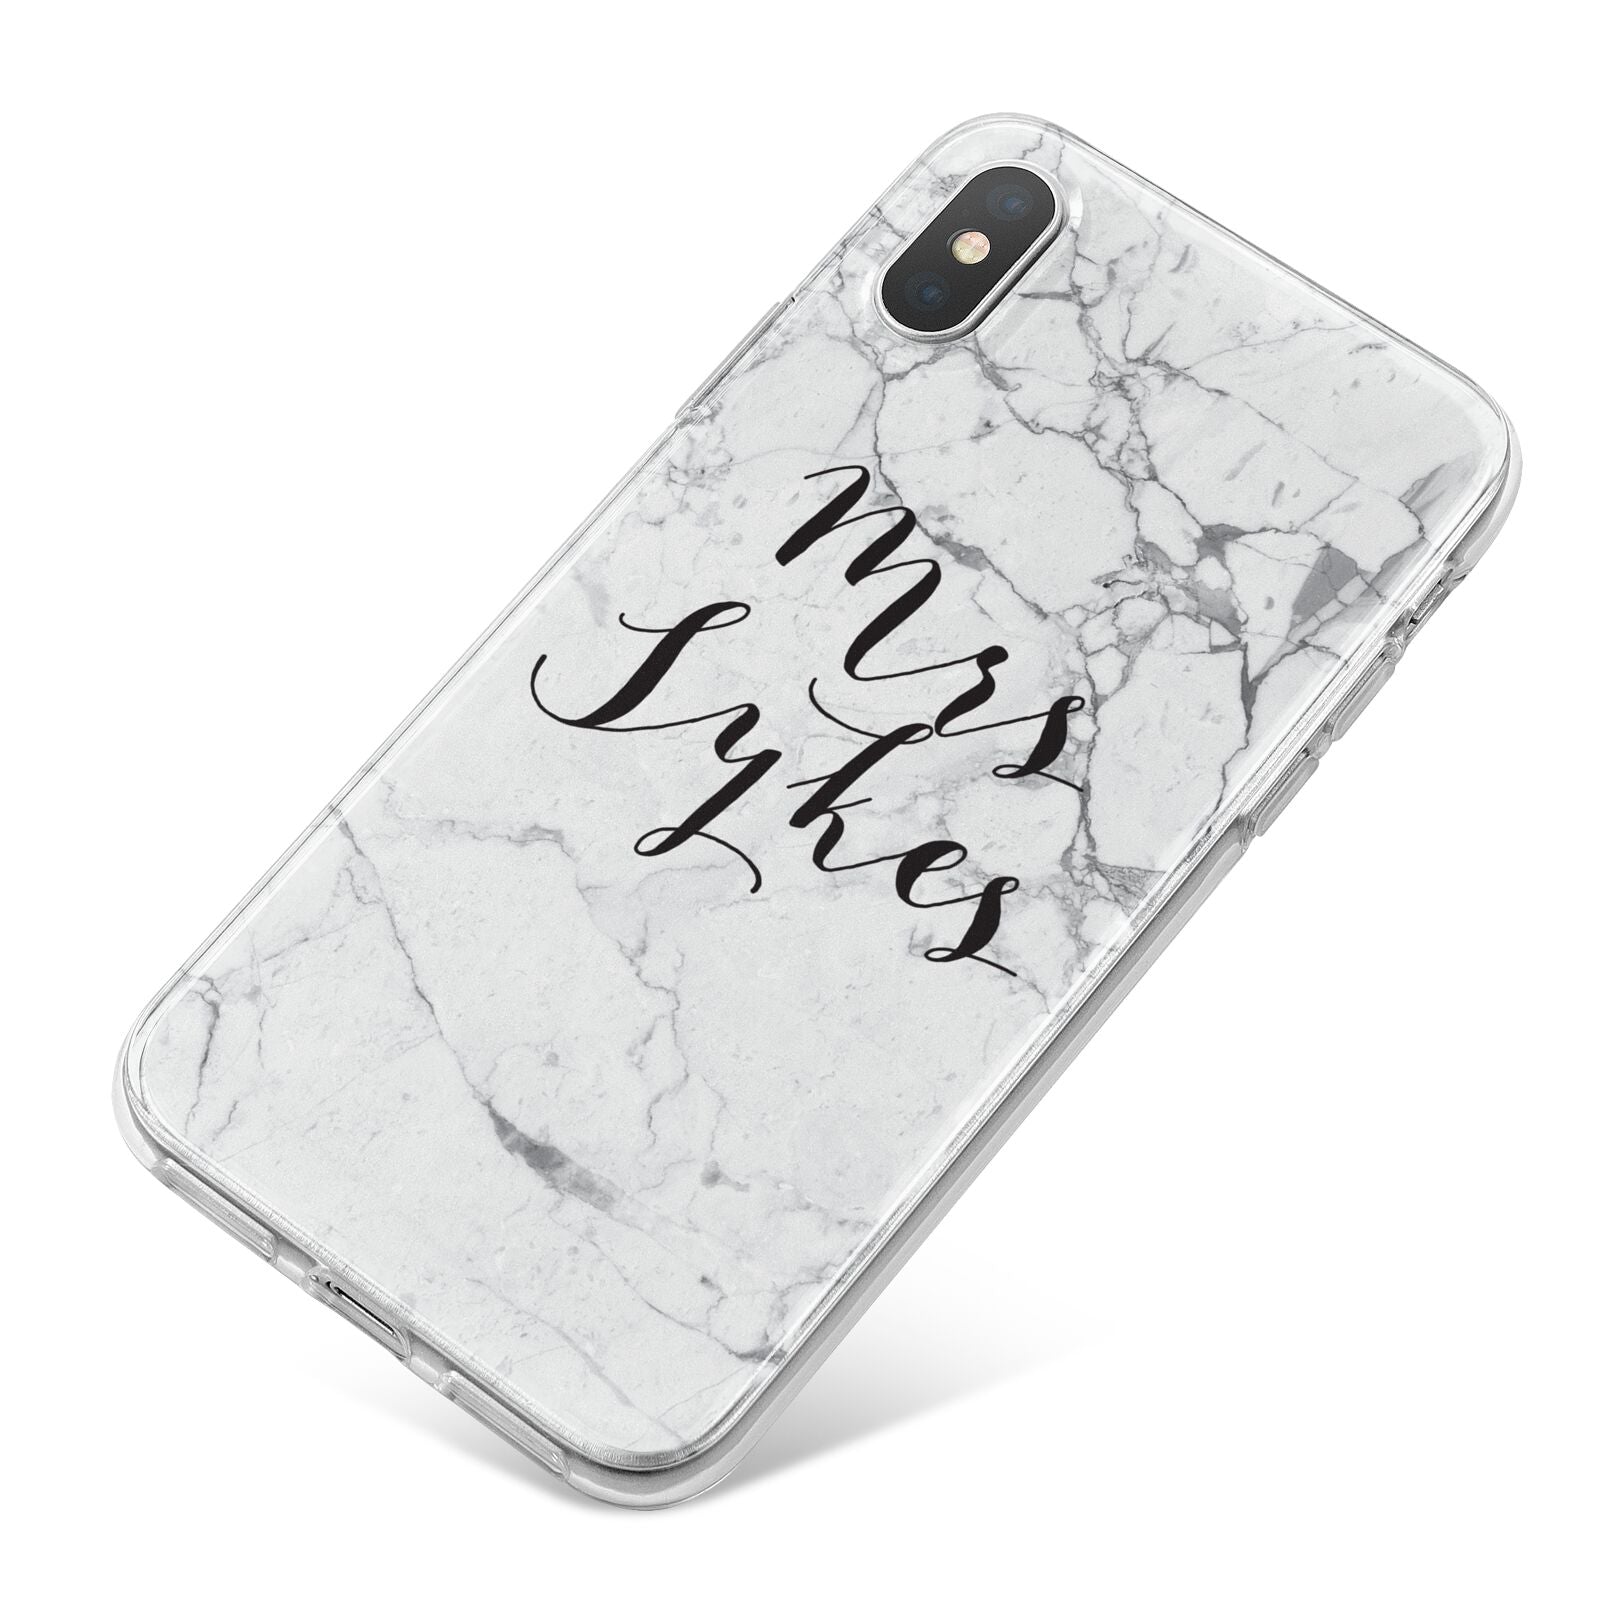 Surname Personalised Marble iPhone X Bumper Case on Silver iPhone